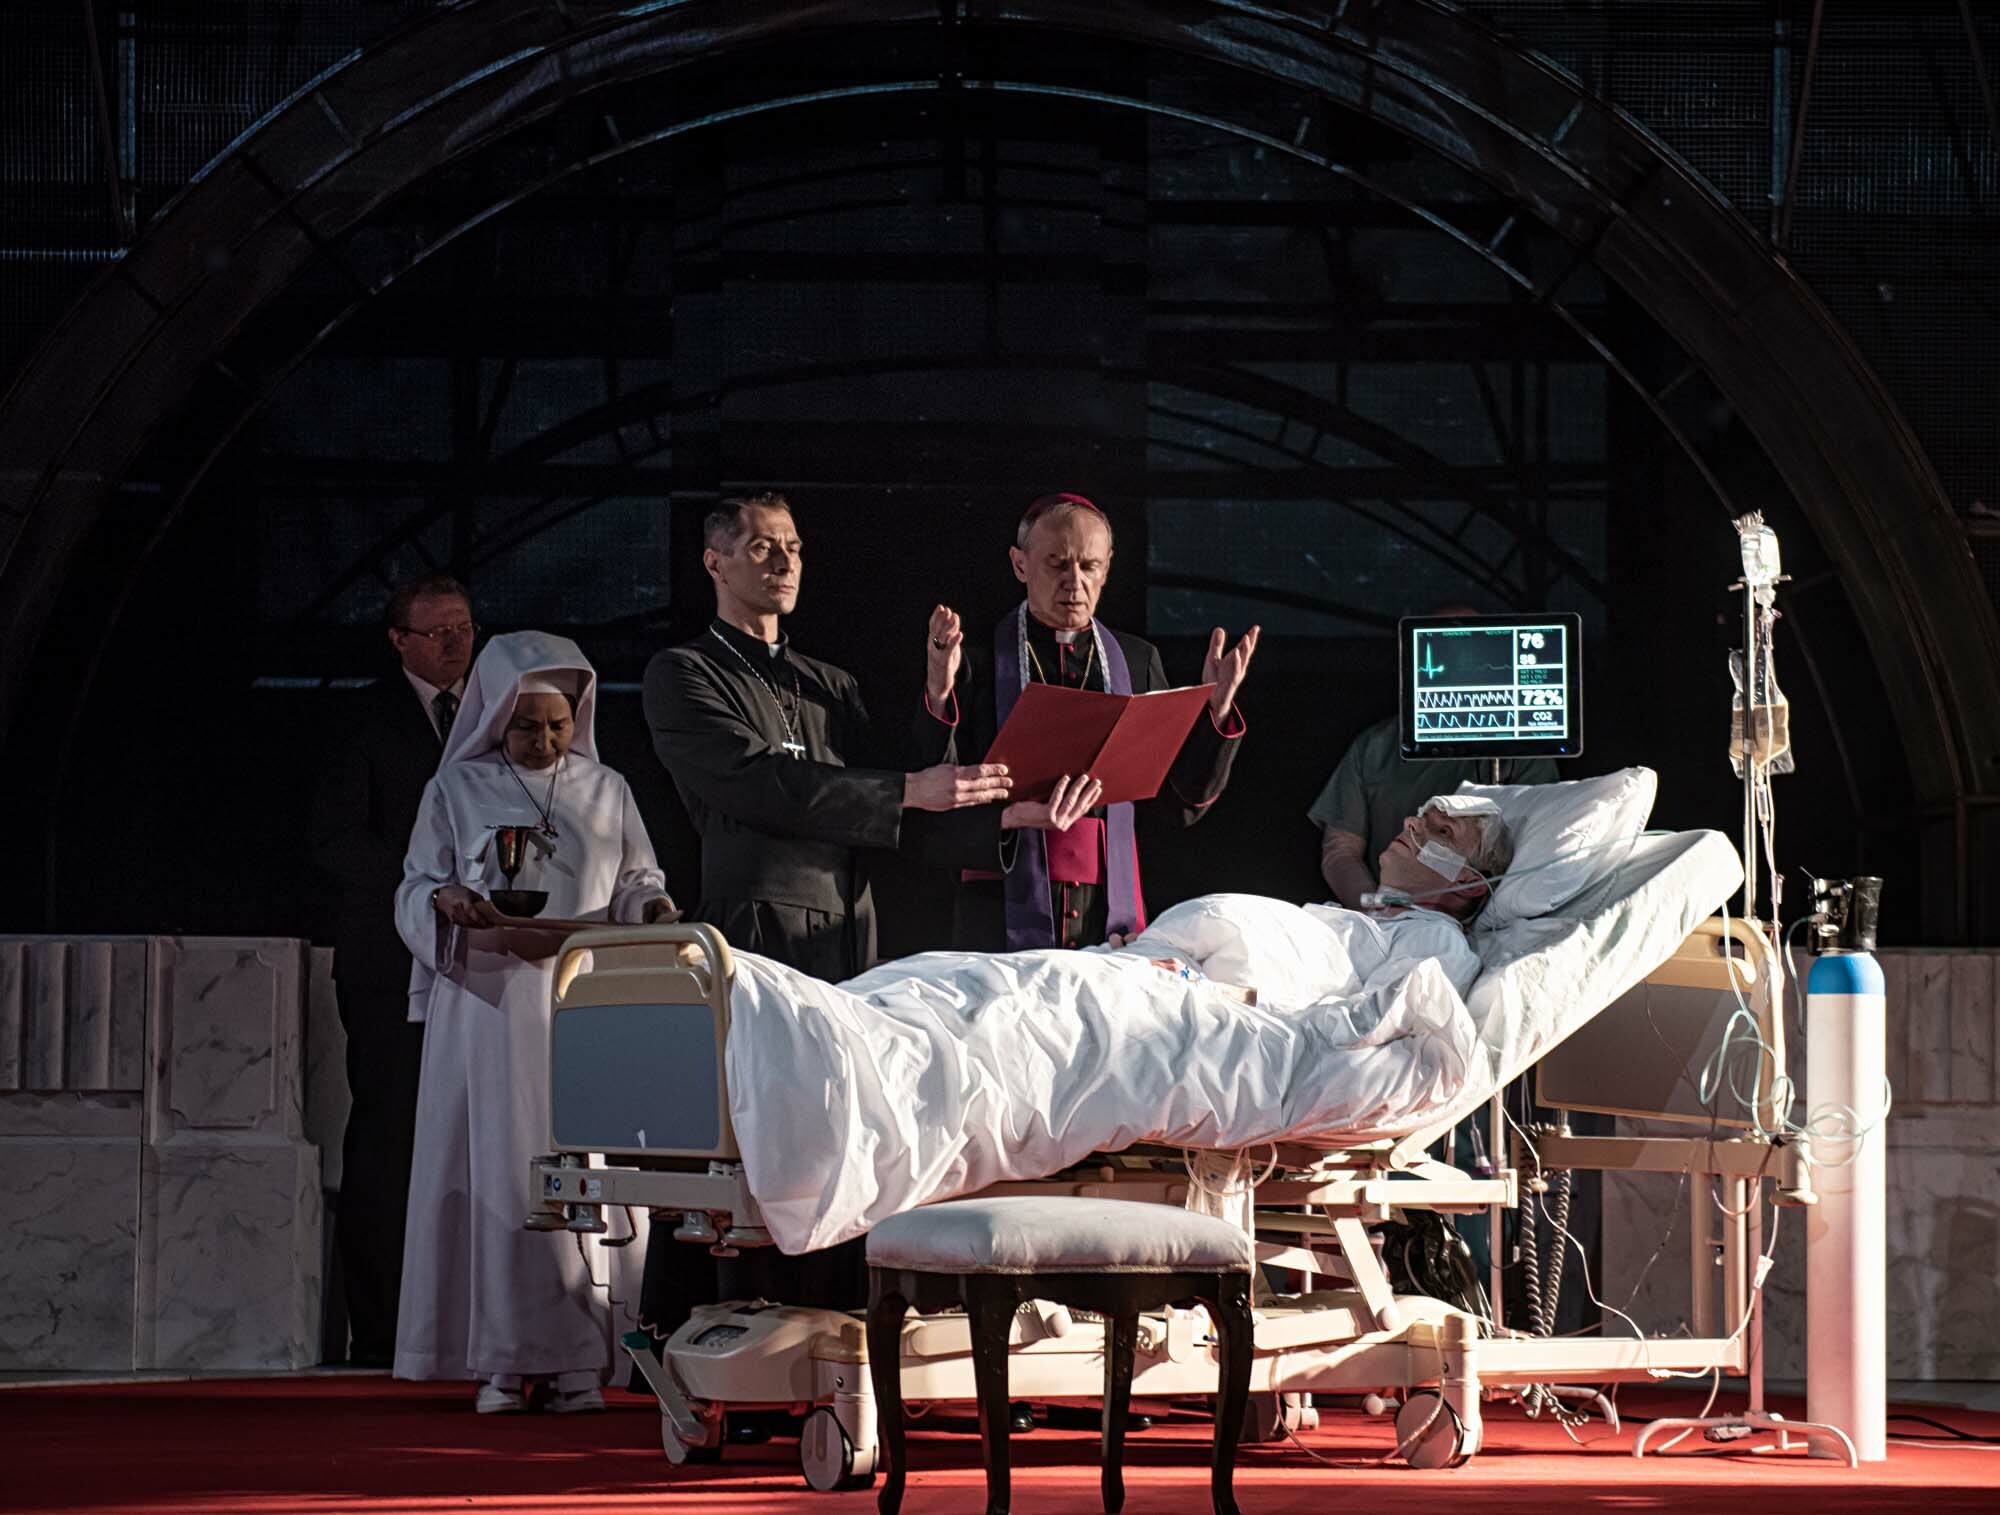 Two actors in costume as priests stand and pray over another actor portraying the bedridden Pope John Paul II, while two other performers look on from upstage.